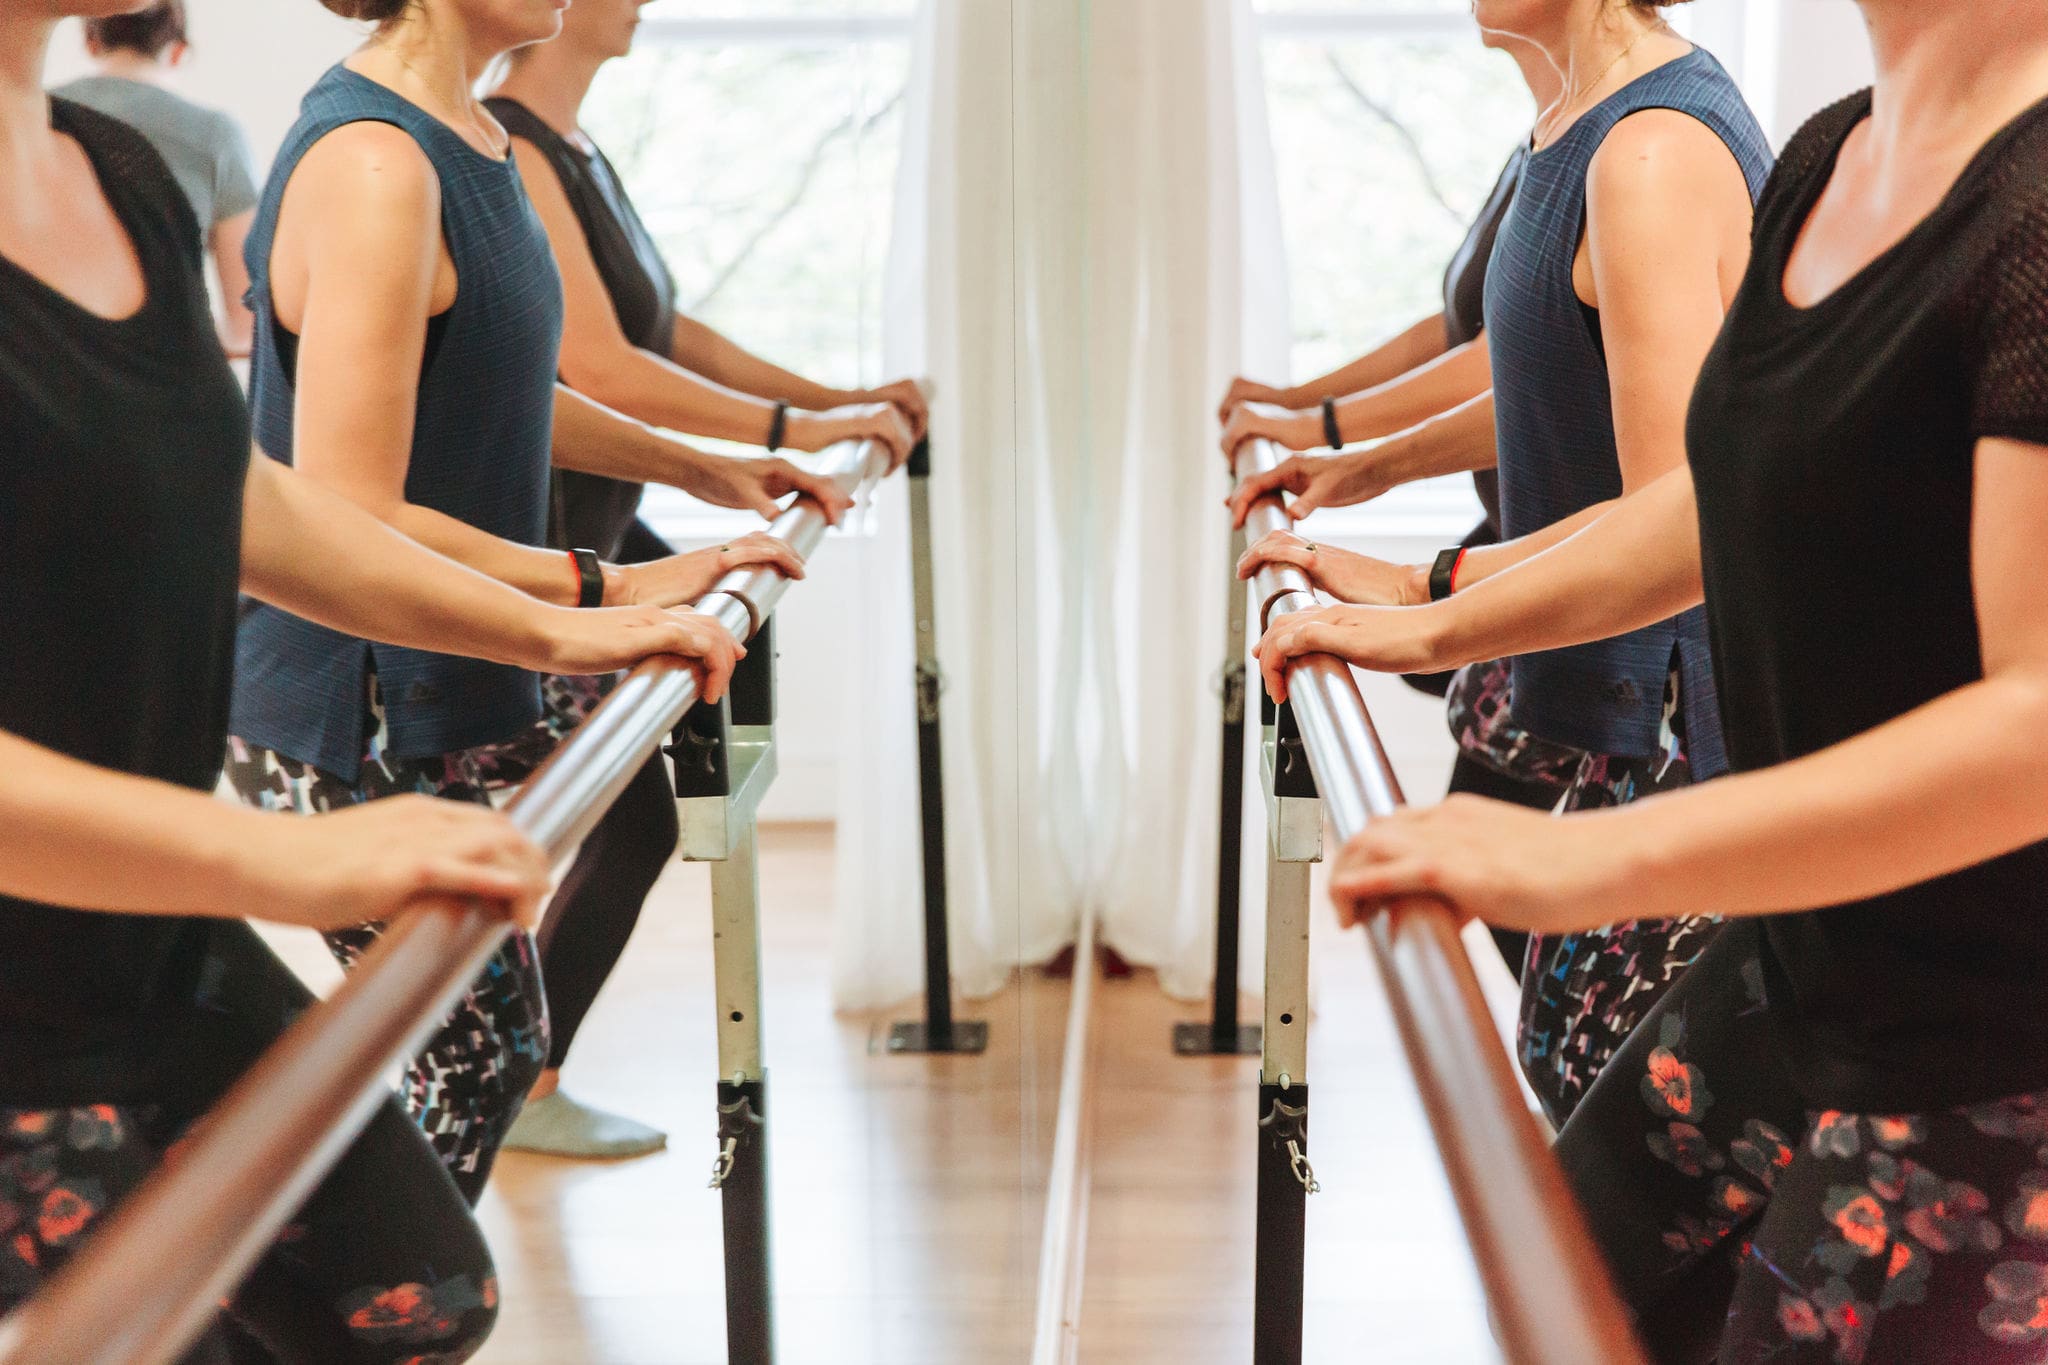 How to Prepare for Your First Barre Class